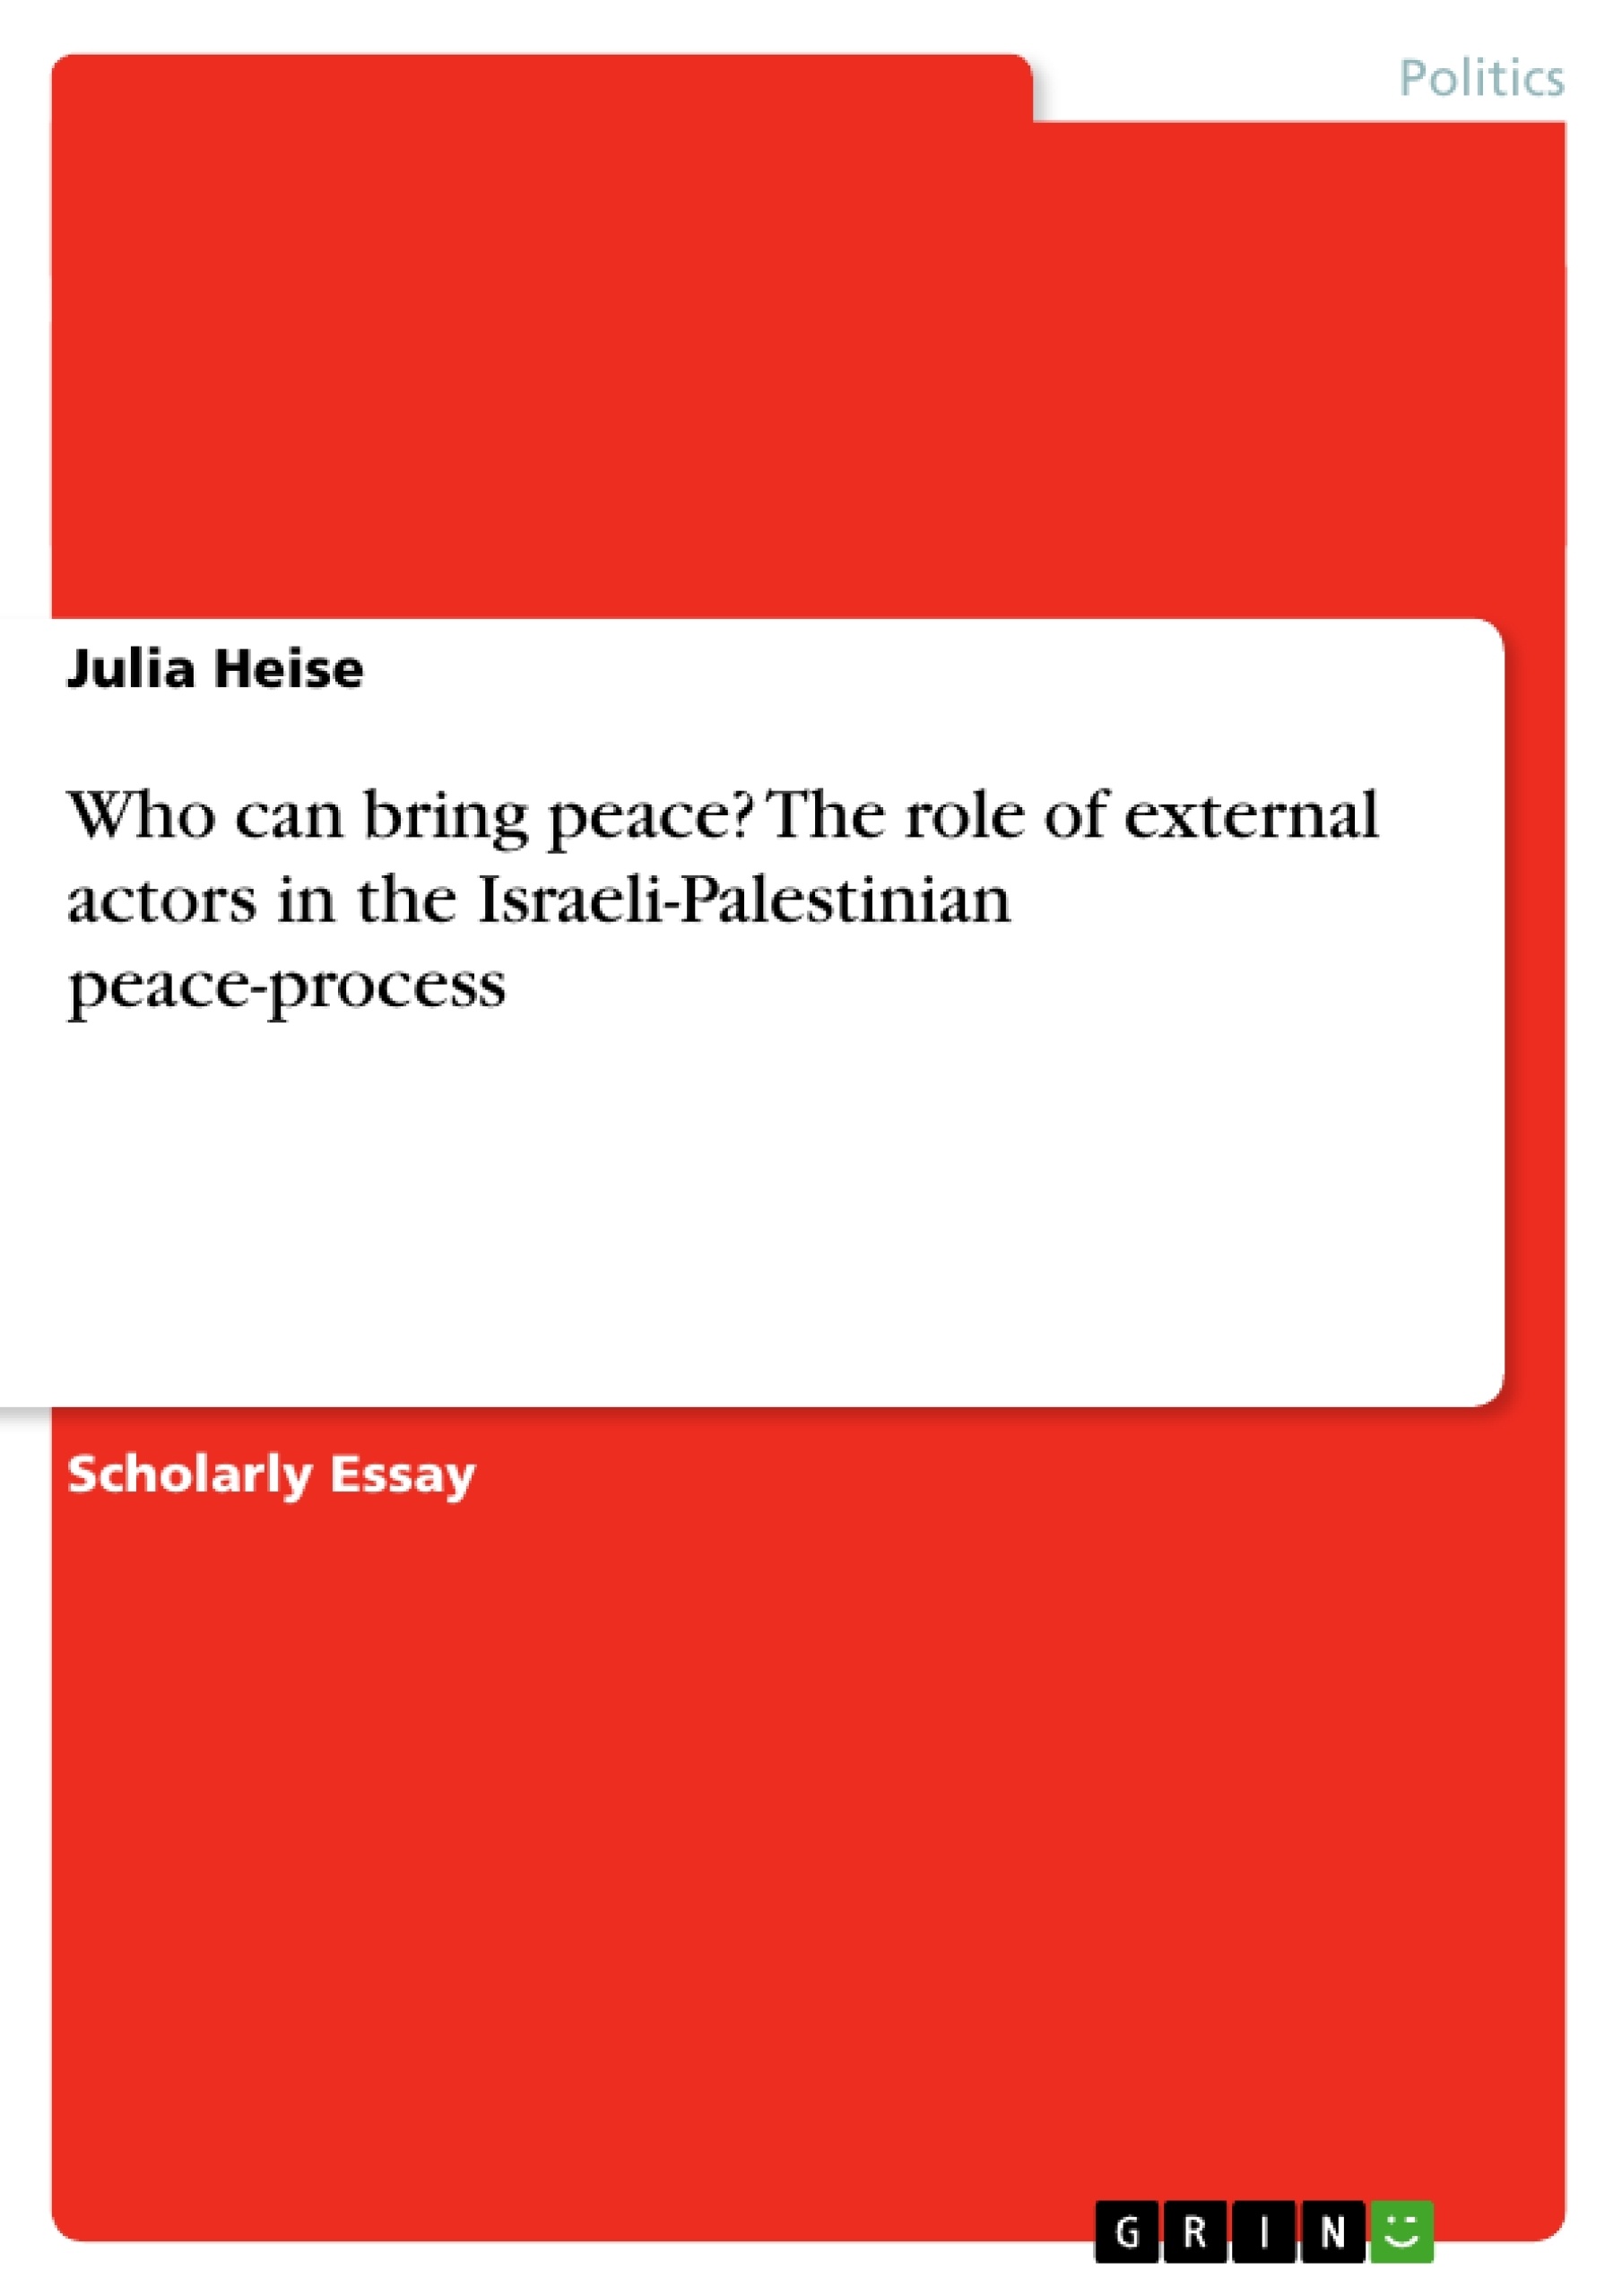 Titre: Who can bring peace? The role of external actors in the Israeli-Palestinian peace-process